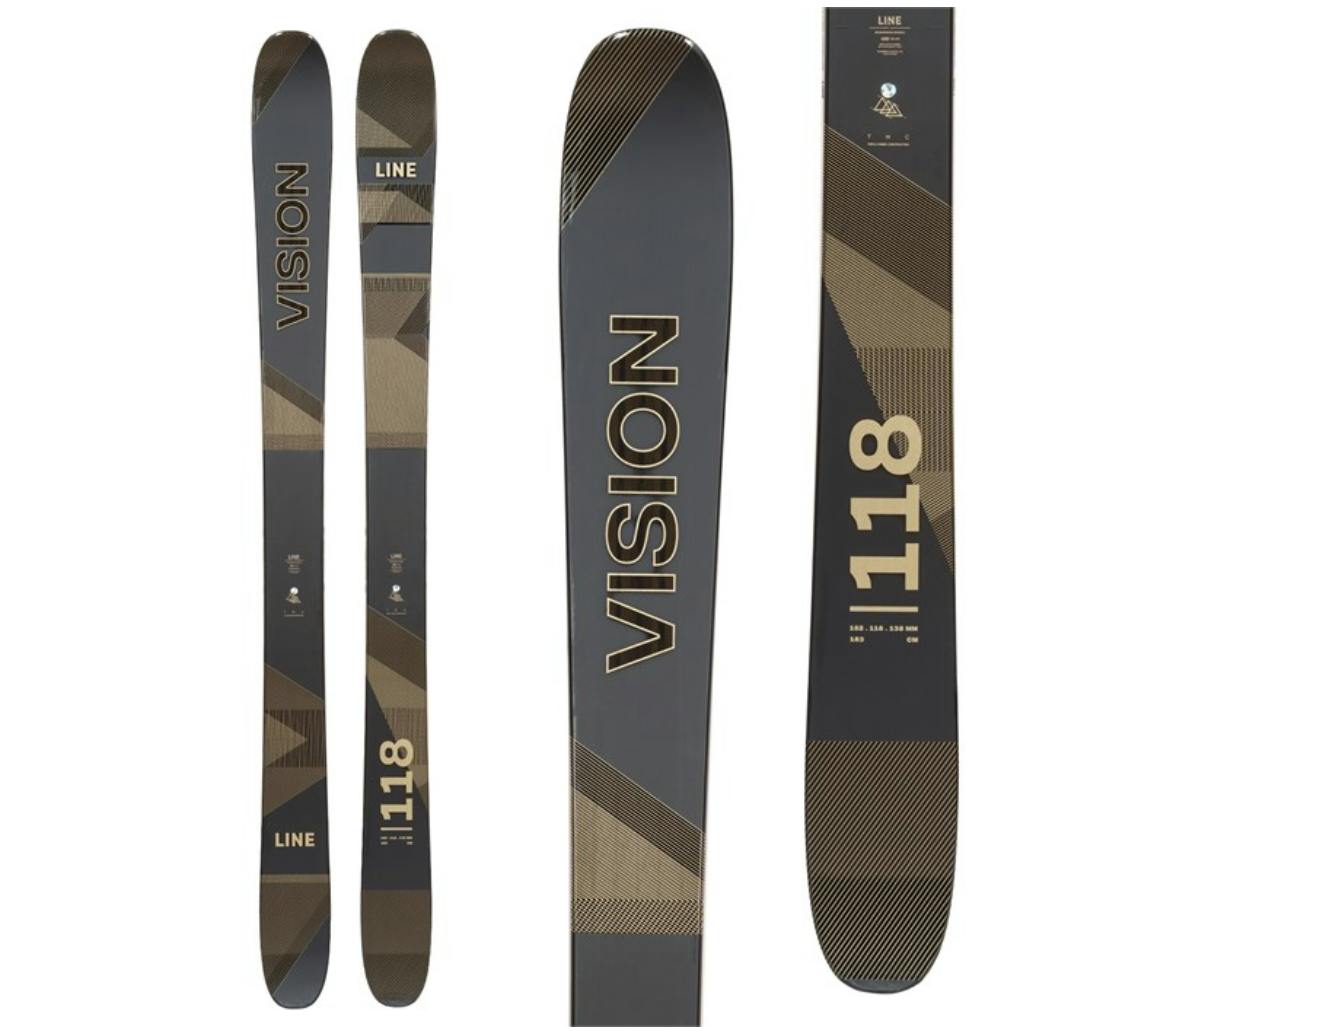 The Line Vision 118 Skis. 